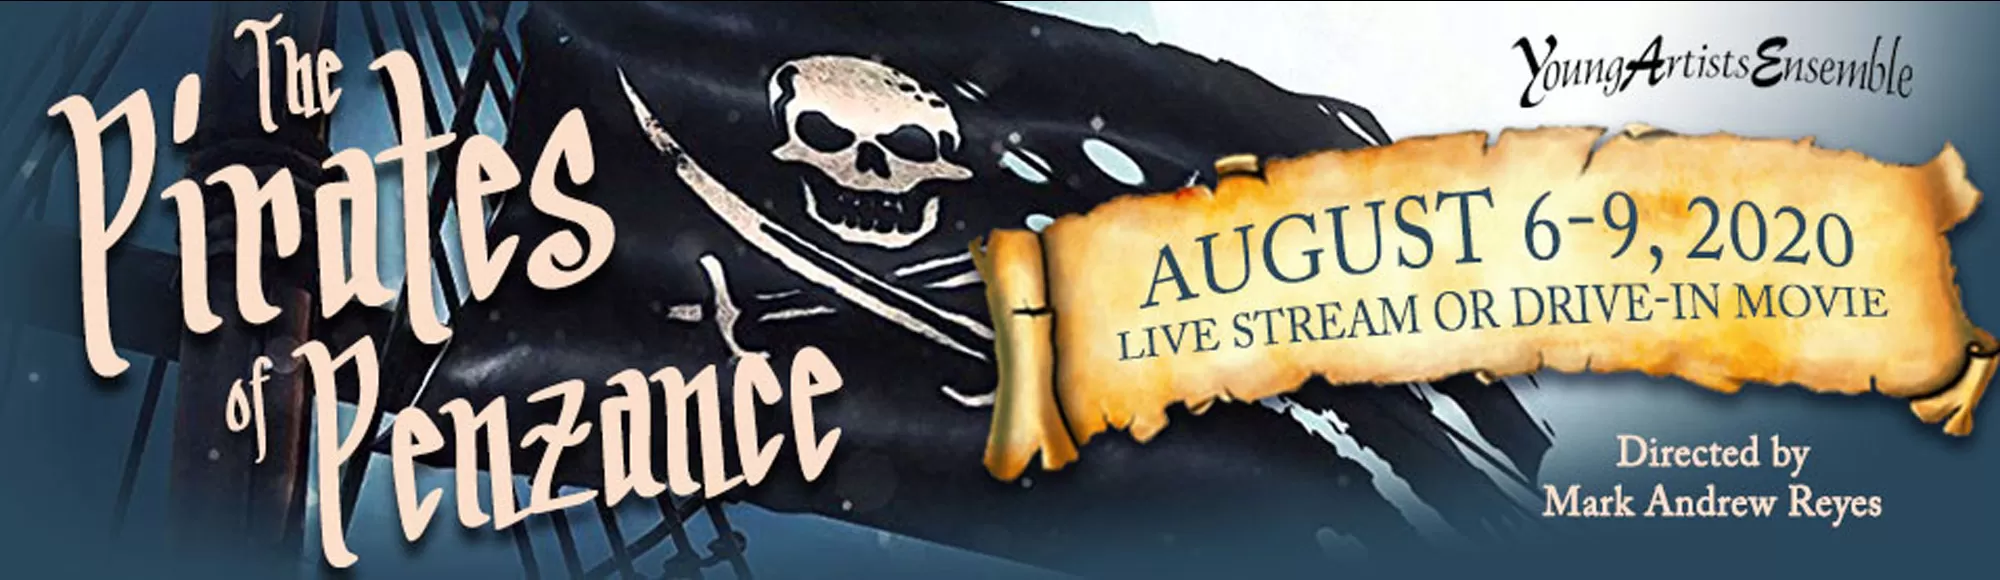 Drive-In Full Cast Live 8/7/20 The Pirates of Penzance - Live Stream